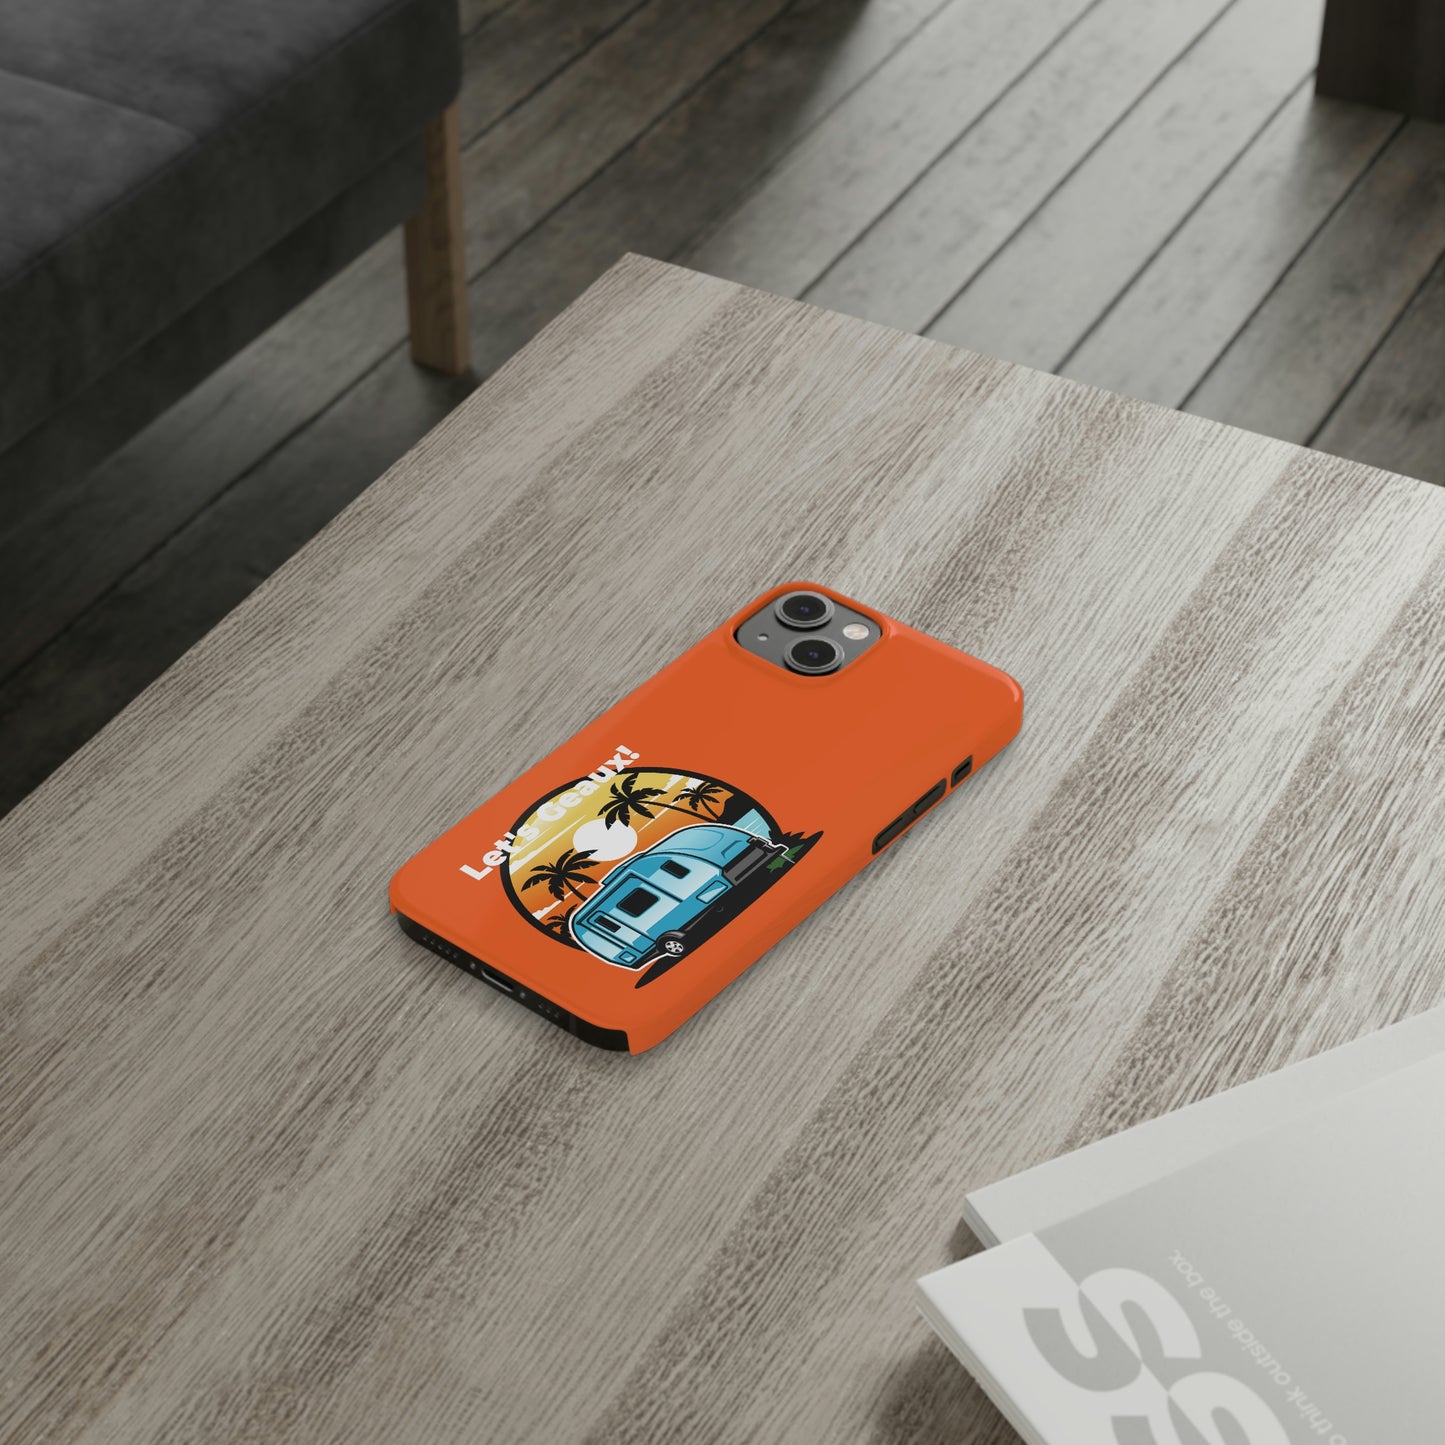 Protect Your Travel Memories with the Let's Geaux Phone Case - Orange